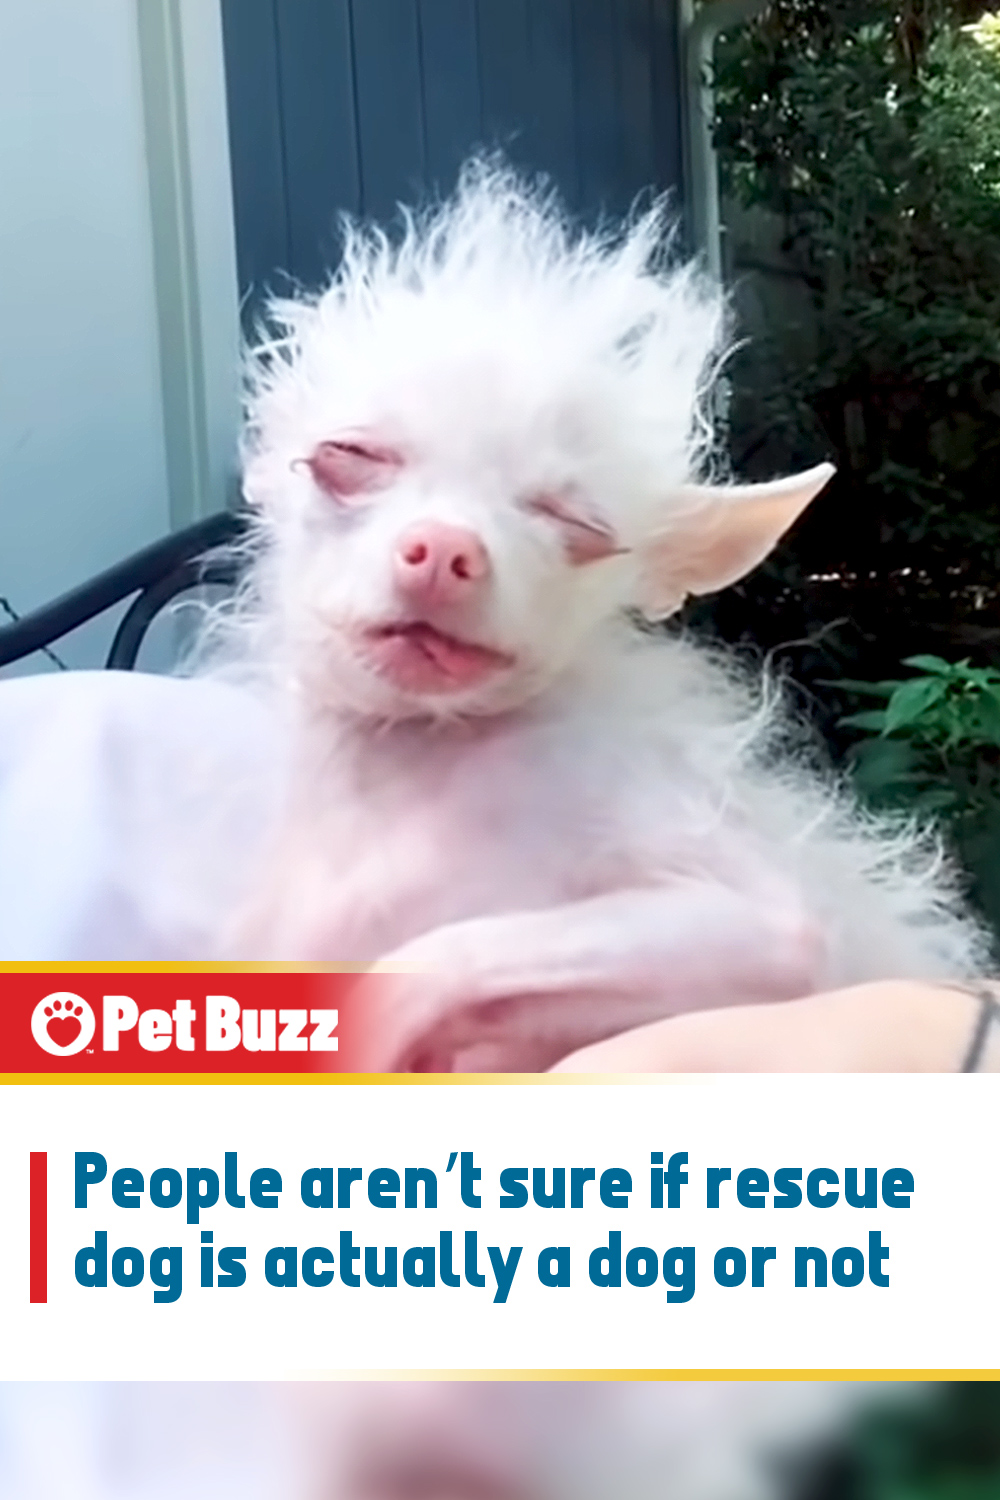 People aren’t sure if rescue dog is actually a dog or not